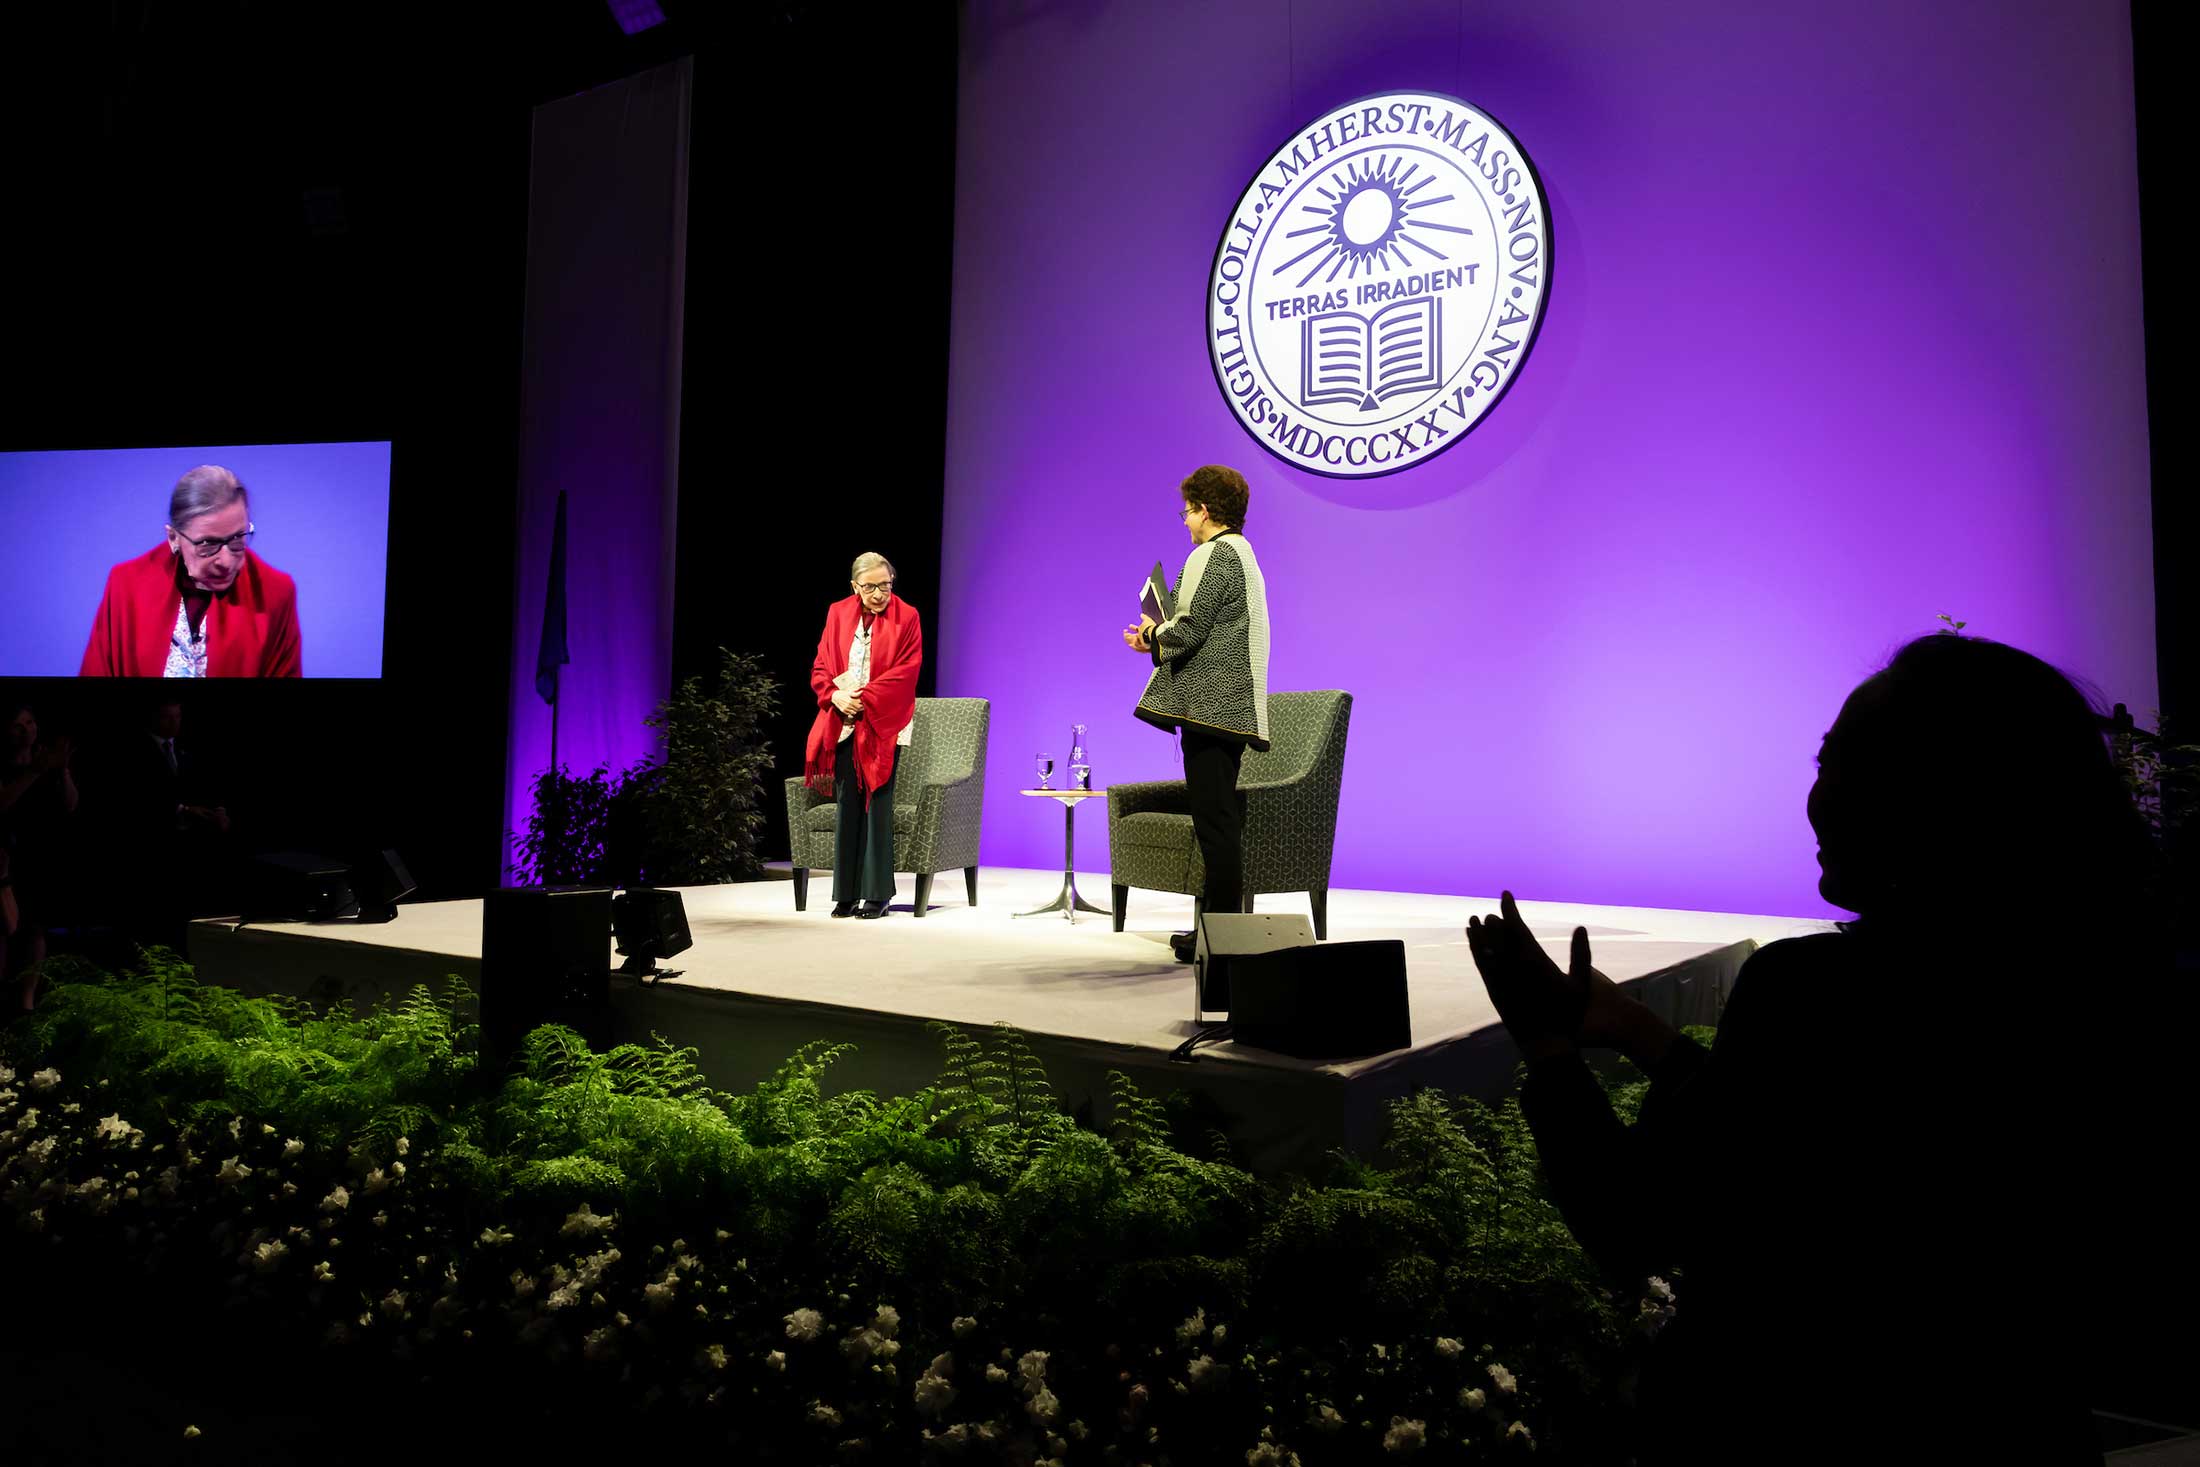 Justice Ginsburg and President Biddy Martin standing on stage side by side